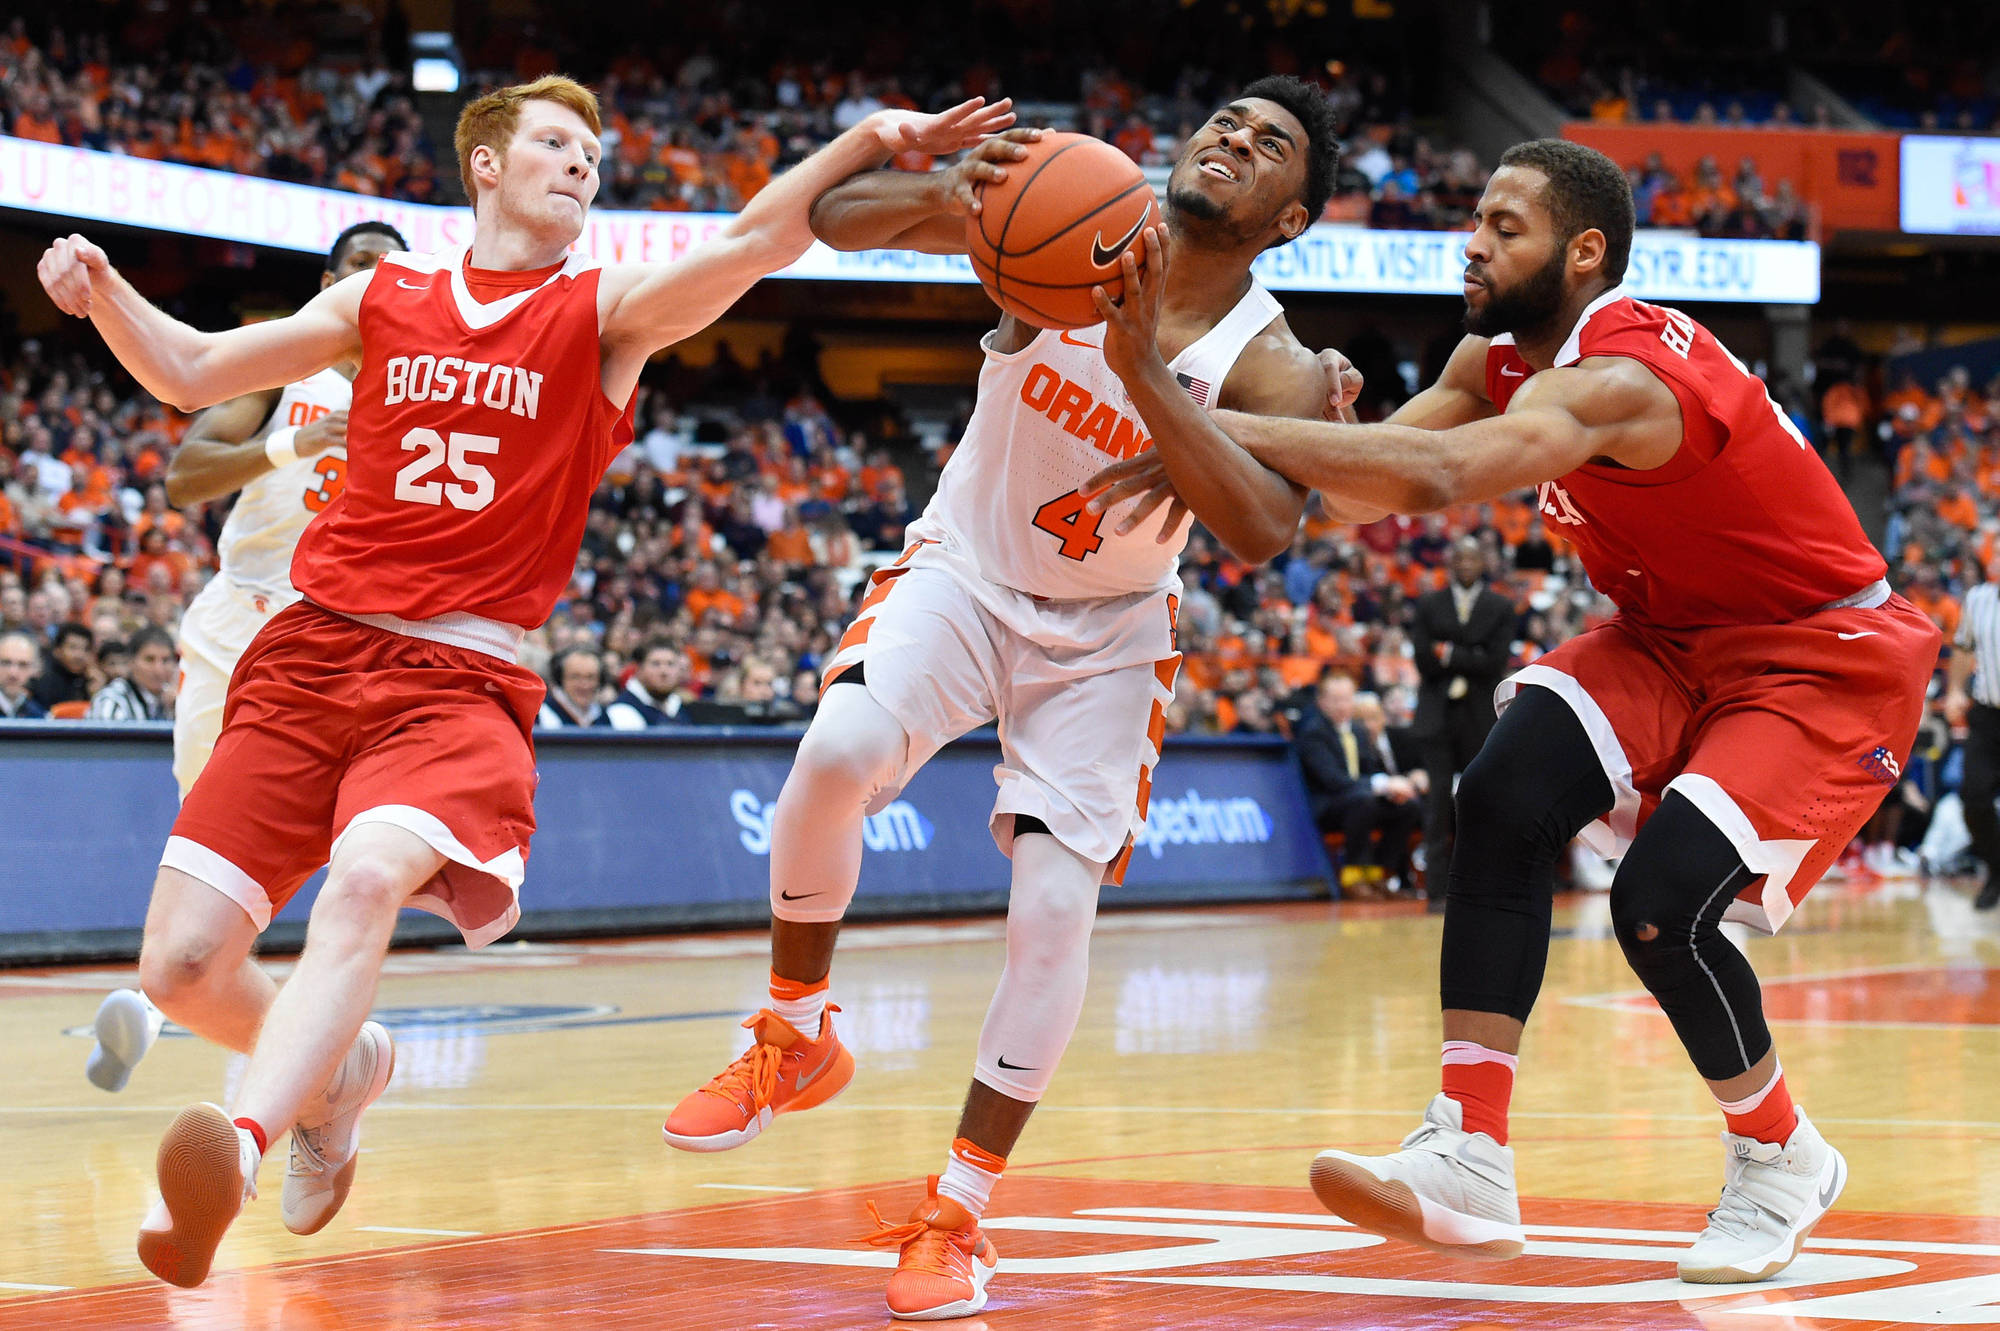 Syracuse stays Perfect at Home vs BU on Saturday Afternoon